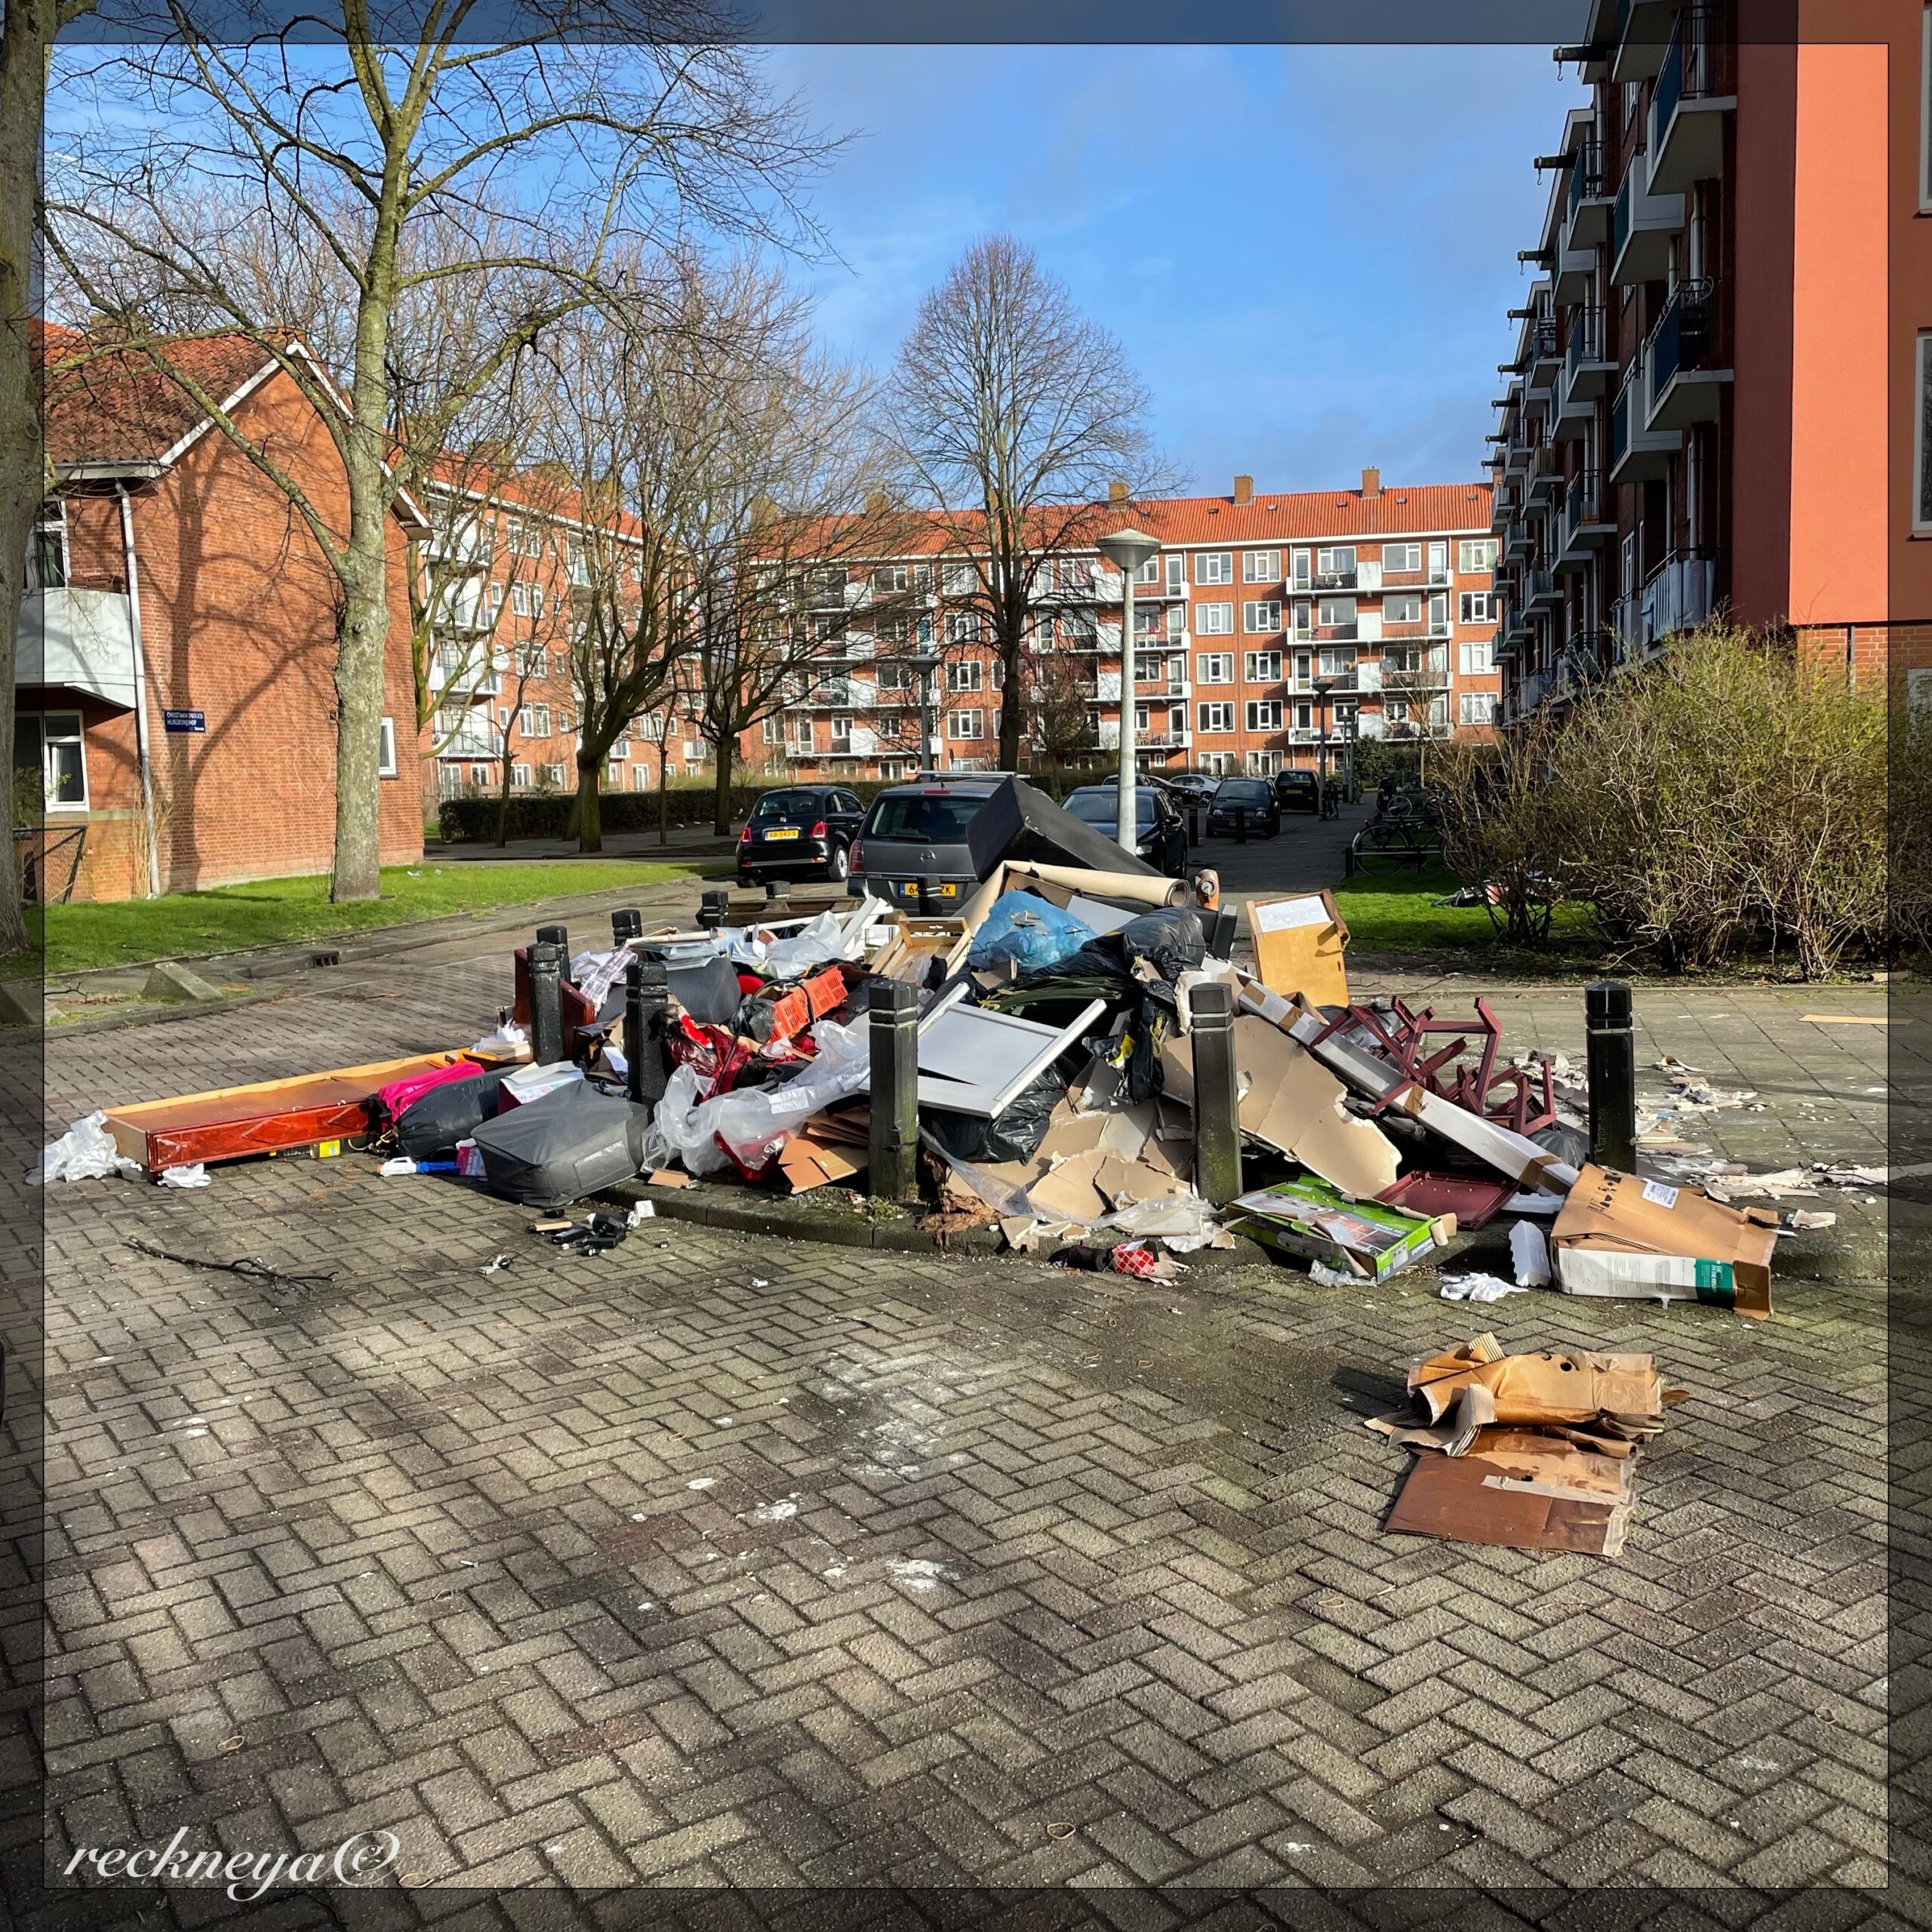 This is a weekly garbage pile near my old work in Amsterdam. The level of societal decline in some neighbourhoods there has reached such lows that the people living there can no longer be arsed to bring their garbage to a bin or garbage disposal. They often just throw their trash from the balconies. This has evolved in a situation where the municipal government allows people to throw their bigger trash onto piles to be collected weekly. Whatever isn't scavenged away will be collected and brought to a sorting facility. Anything that can burn will be thrown into the incinerator, which turns the garbage into electricity and hot water, which is then sold again to the people. It is the opposite image of the green city Amsterdam pretend to be.